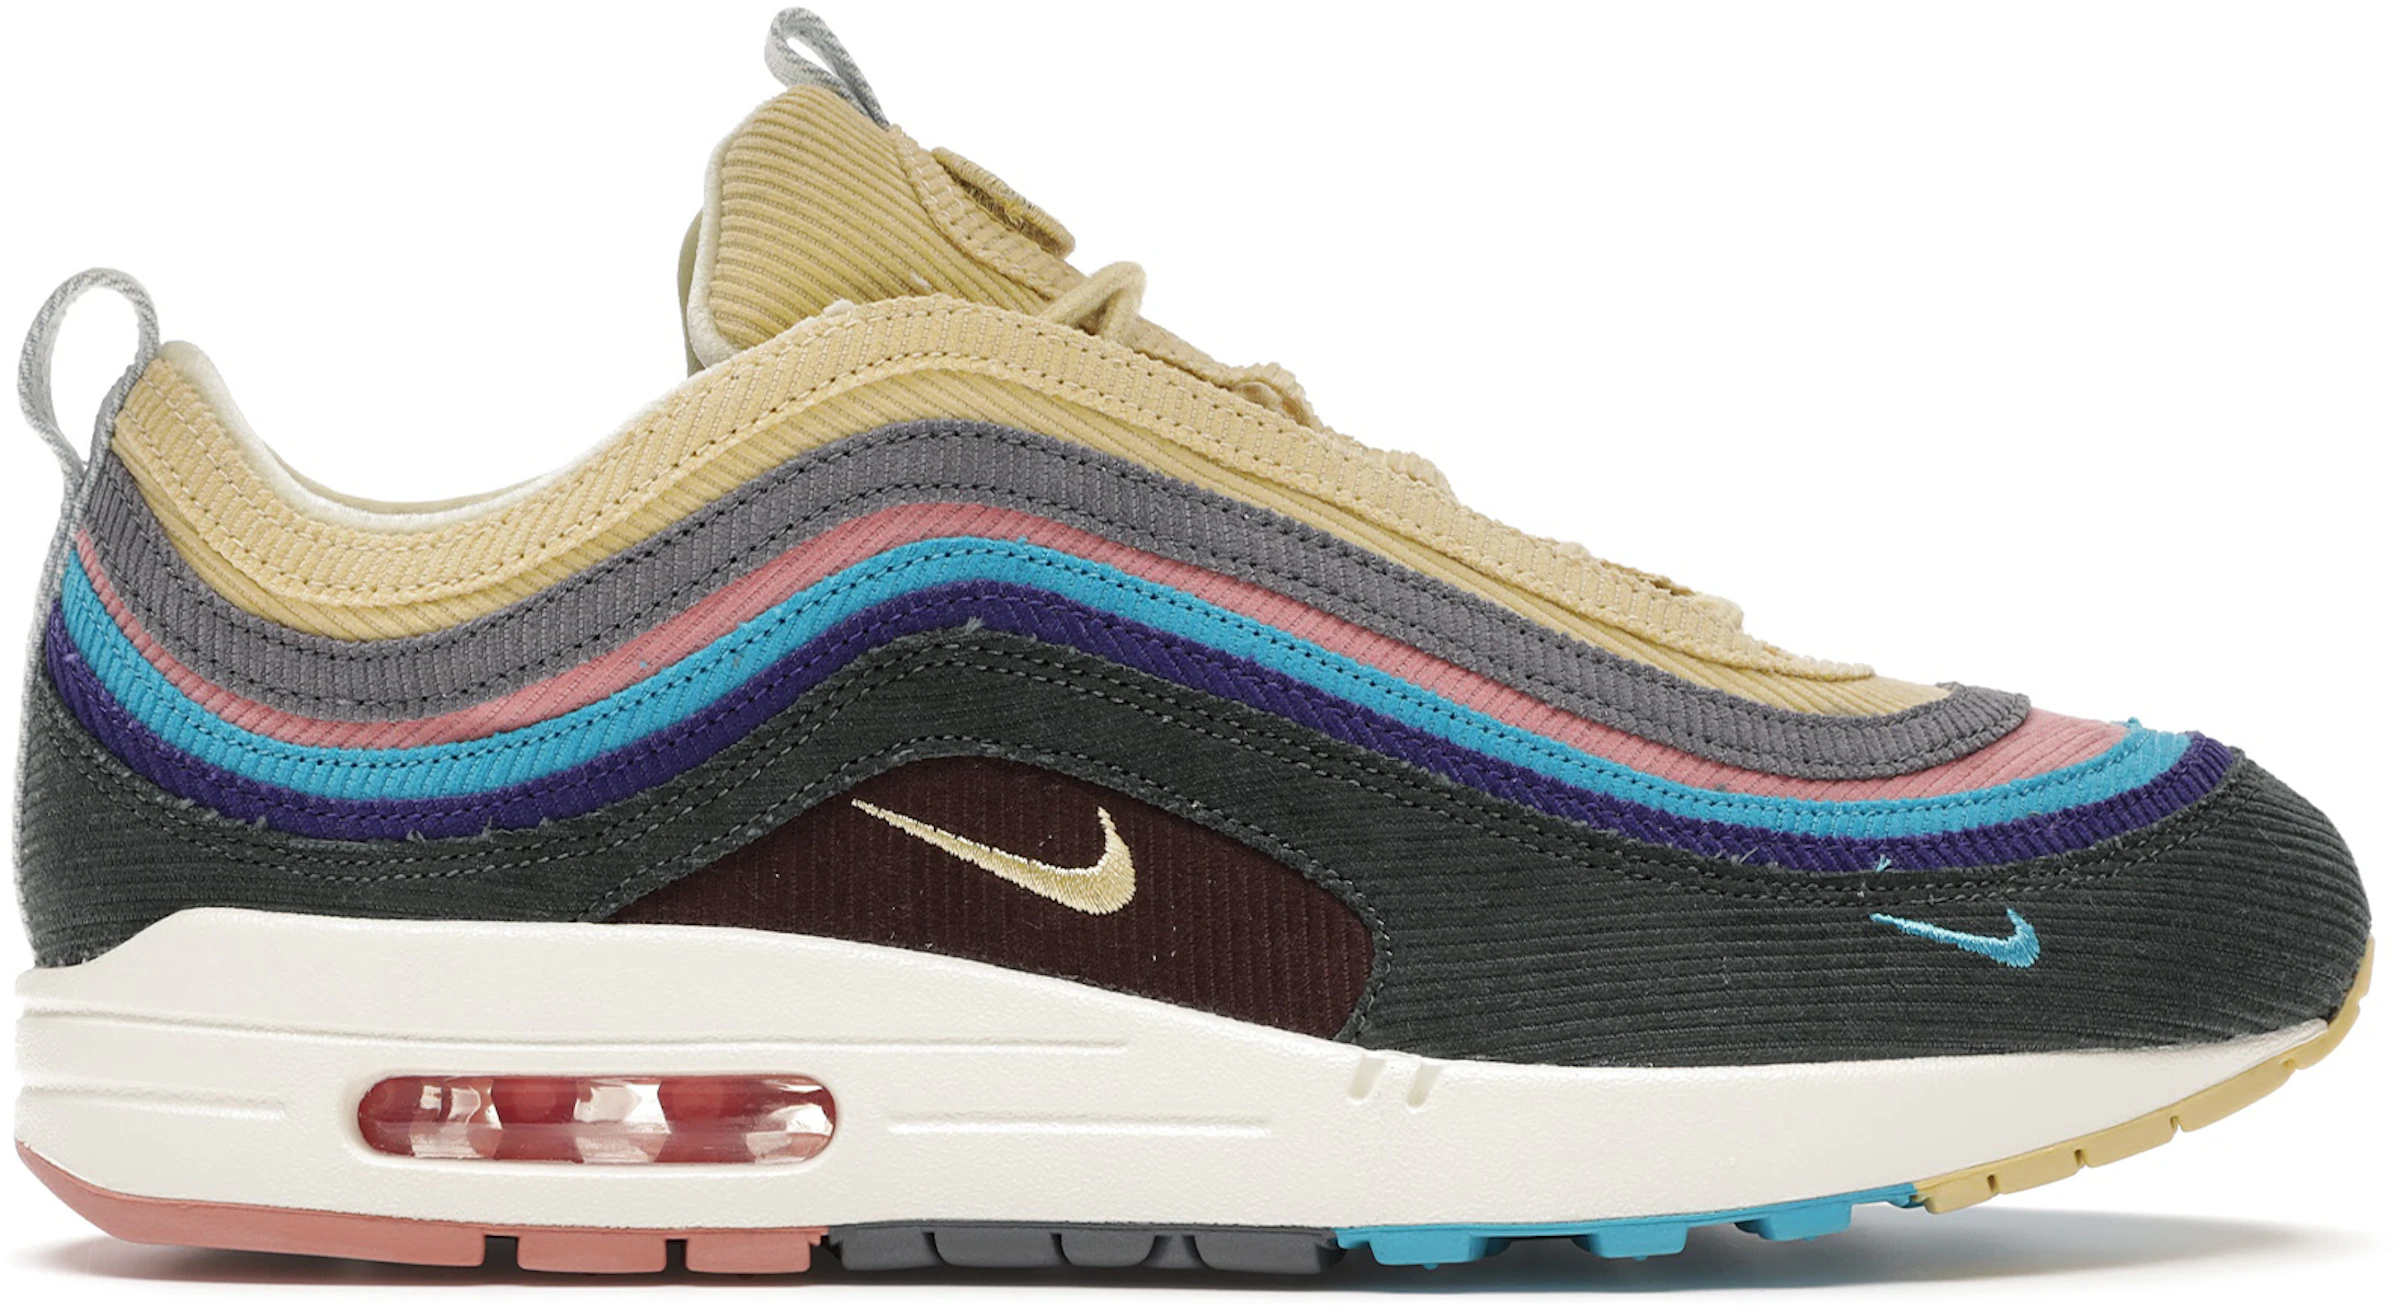 Gestreept Toepassing desinfecteren Nike Air Max 1/97 Sean Wotherspoon (All Accessories and Dustbag) -  AJ4219-400 - US